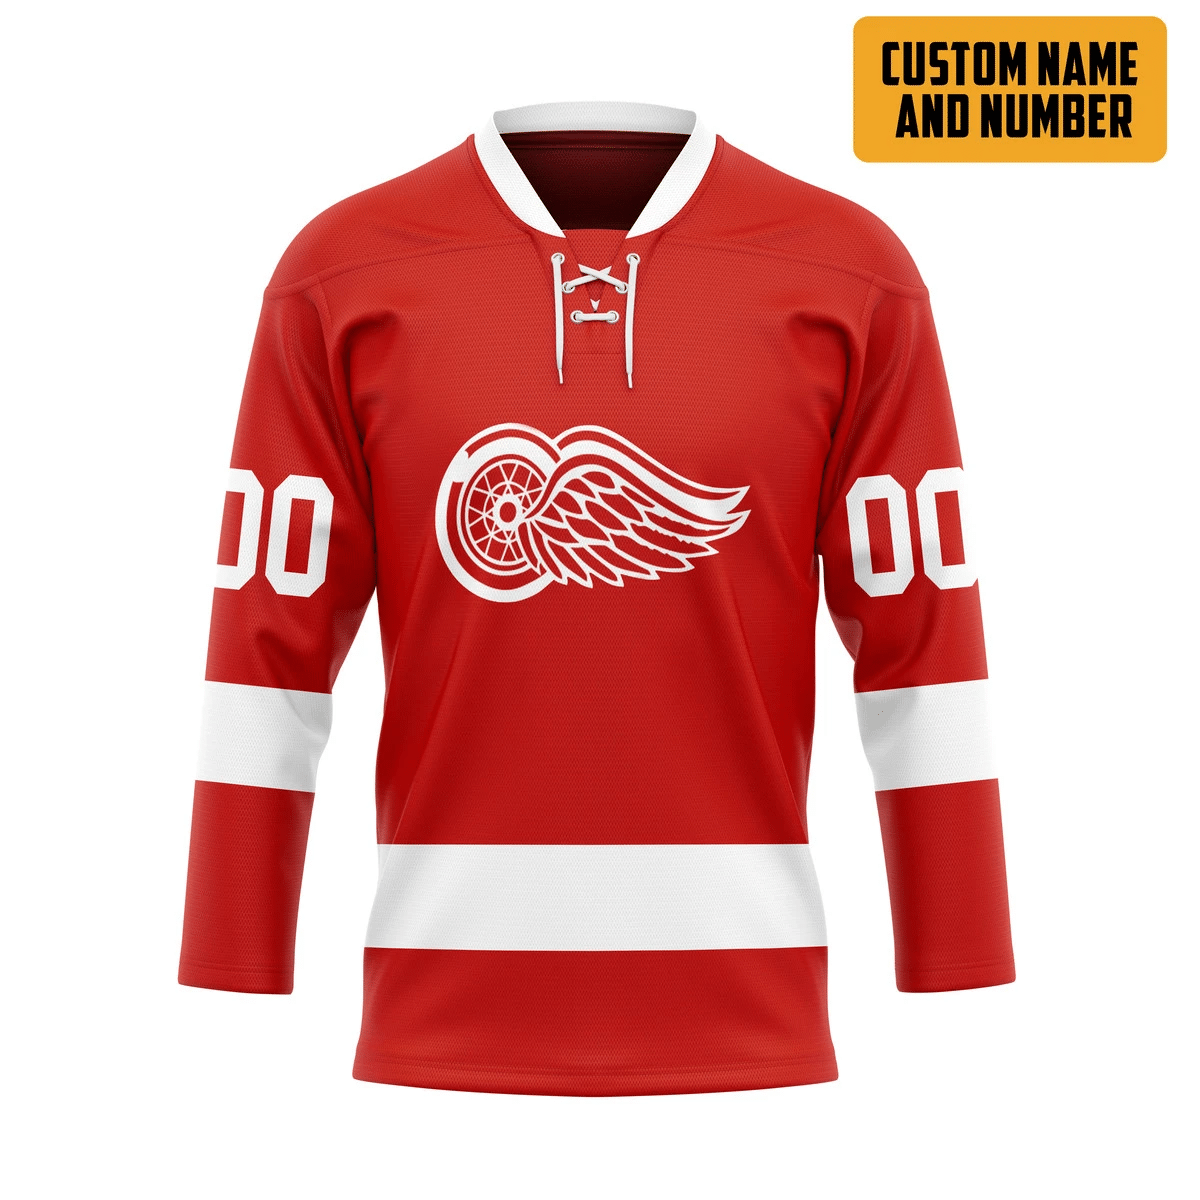 The style of a hockey jersey should match your personality. 88